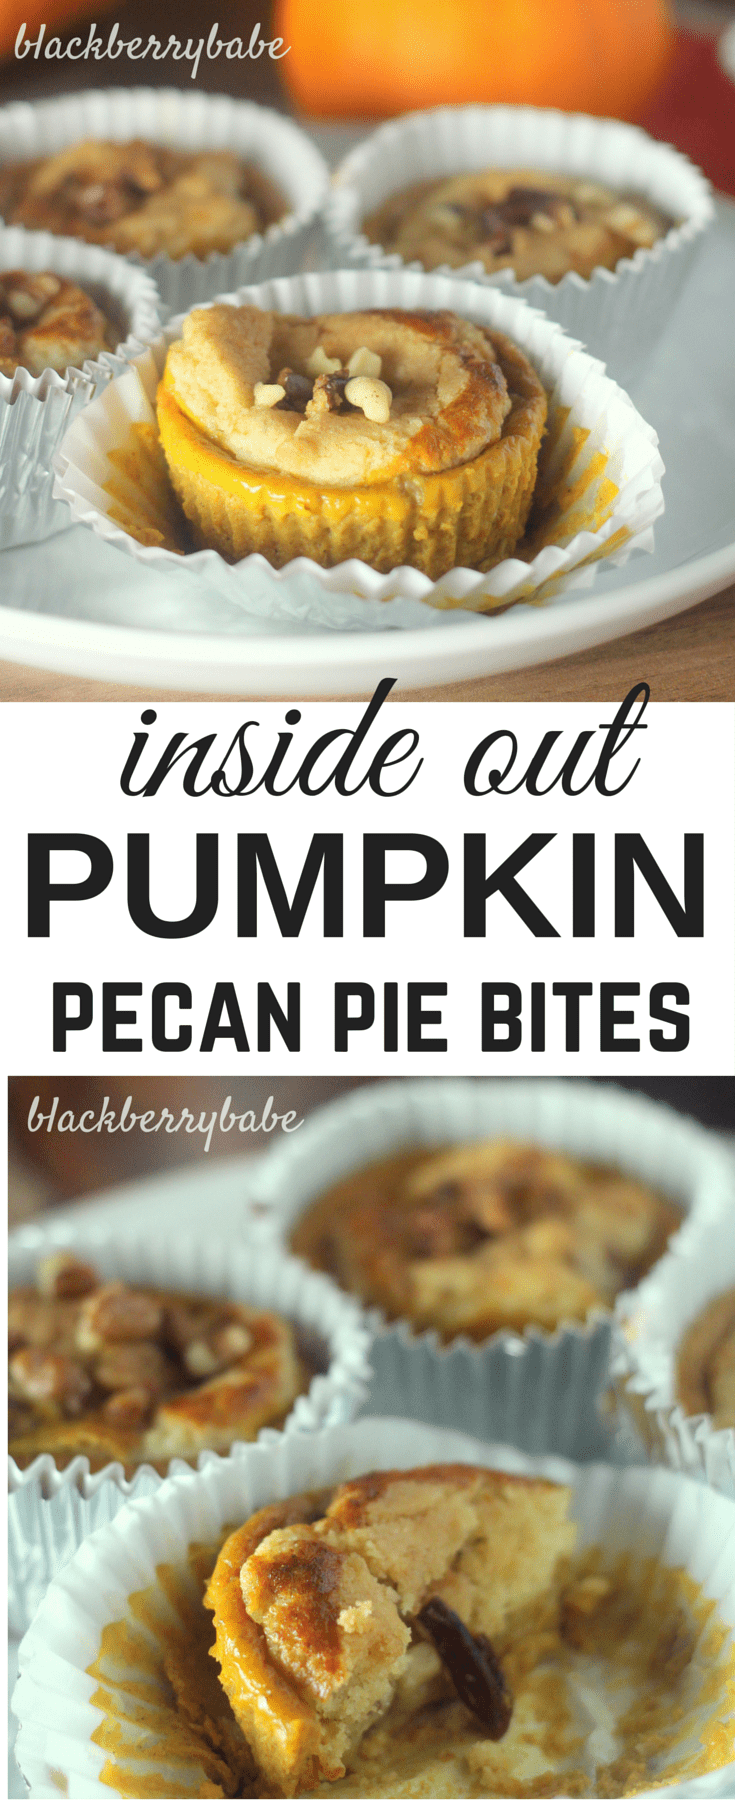 Inside Out Pumpkin Pie Bites- Creamy Pumpkin Pie filling, filled with a crumbly pecan shortbread! The perfect fun and EASY dessert for Thanksgiving. Recipe by @michelle_goth www.blackberrycooks.com